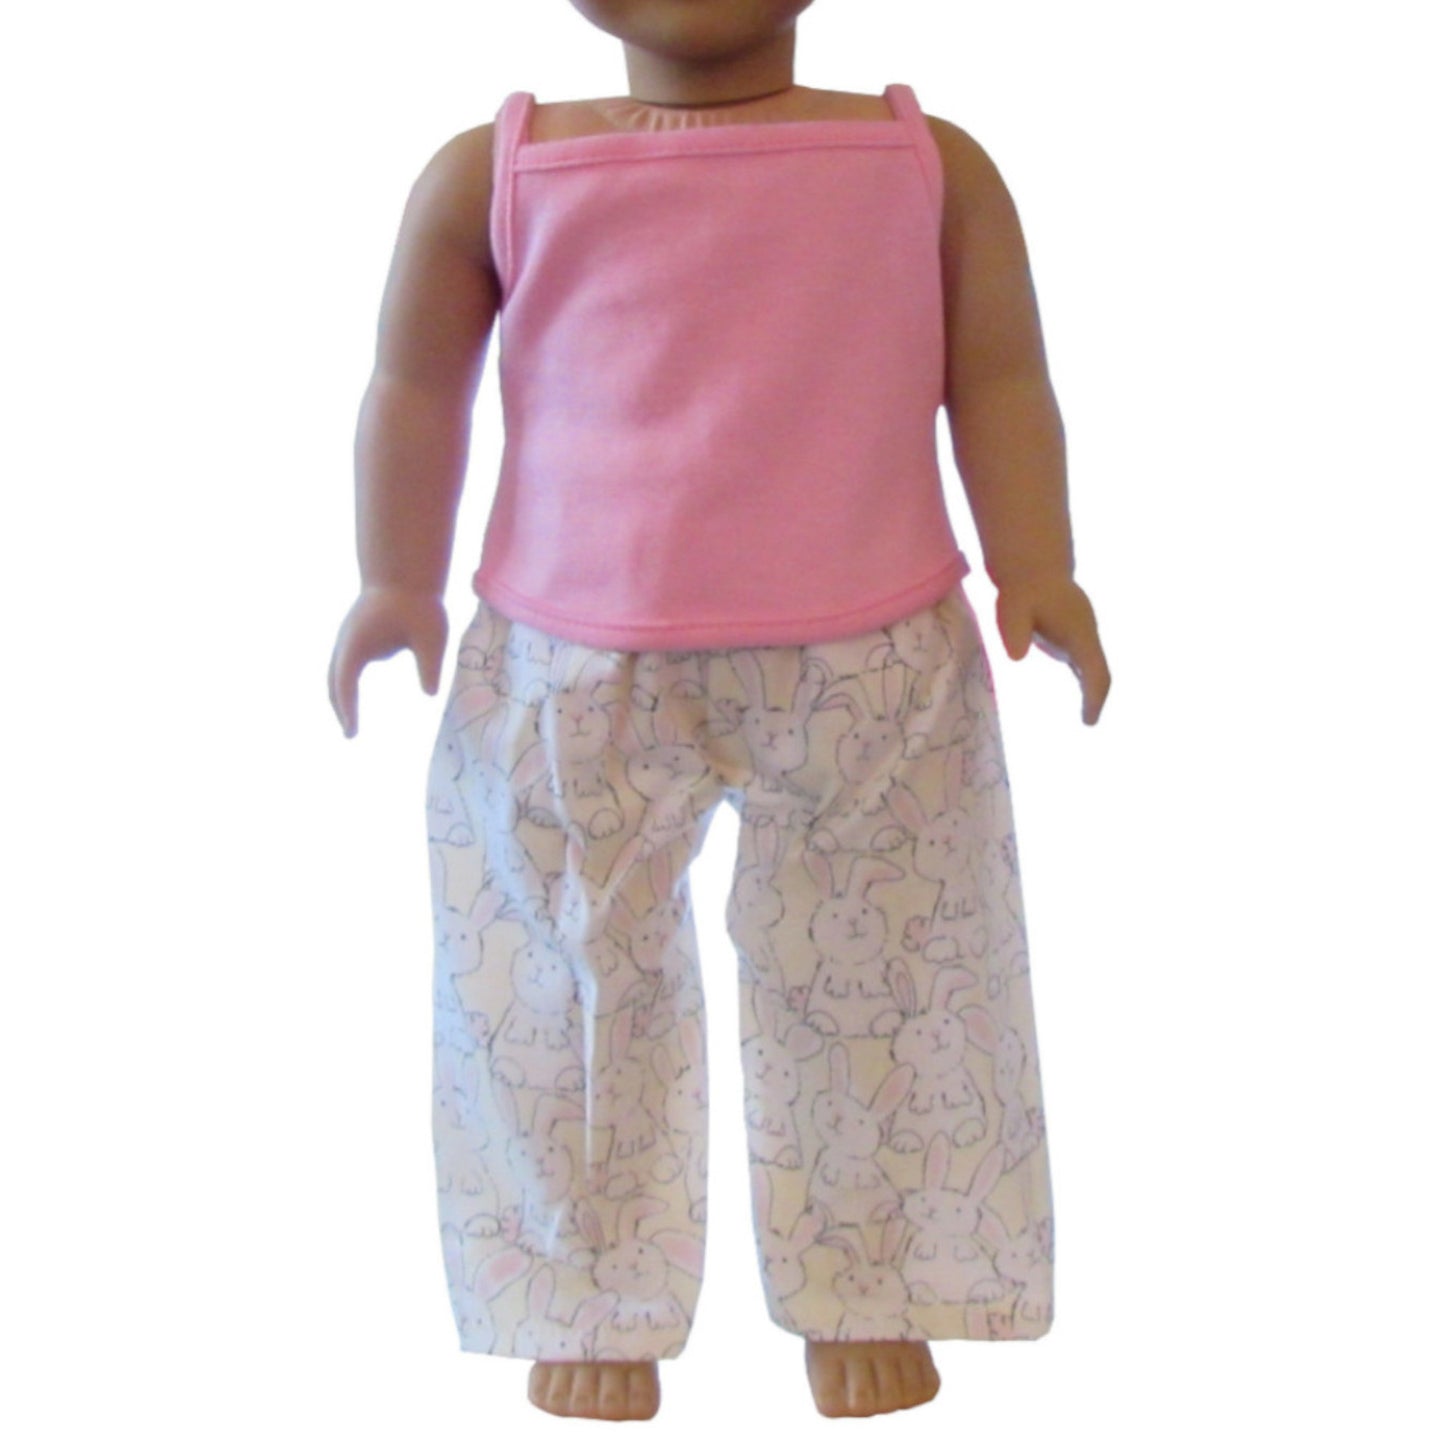 Pink Tank Top and Bunny Sleeping Pants for 18-inch dolls with doll